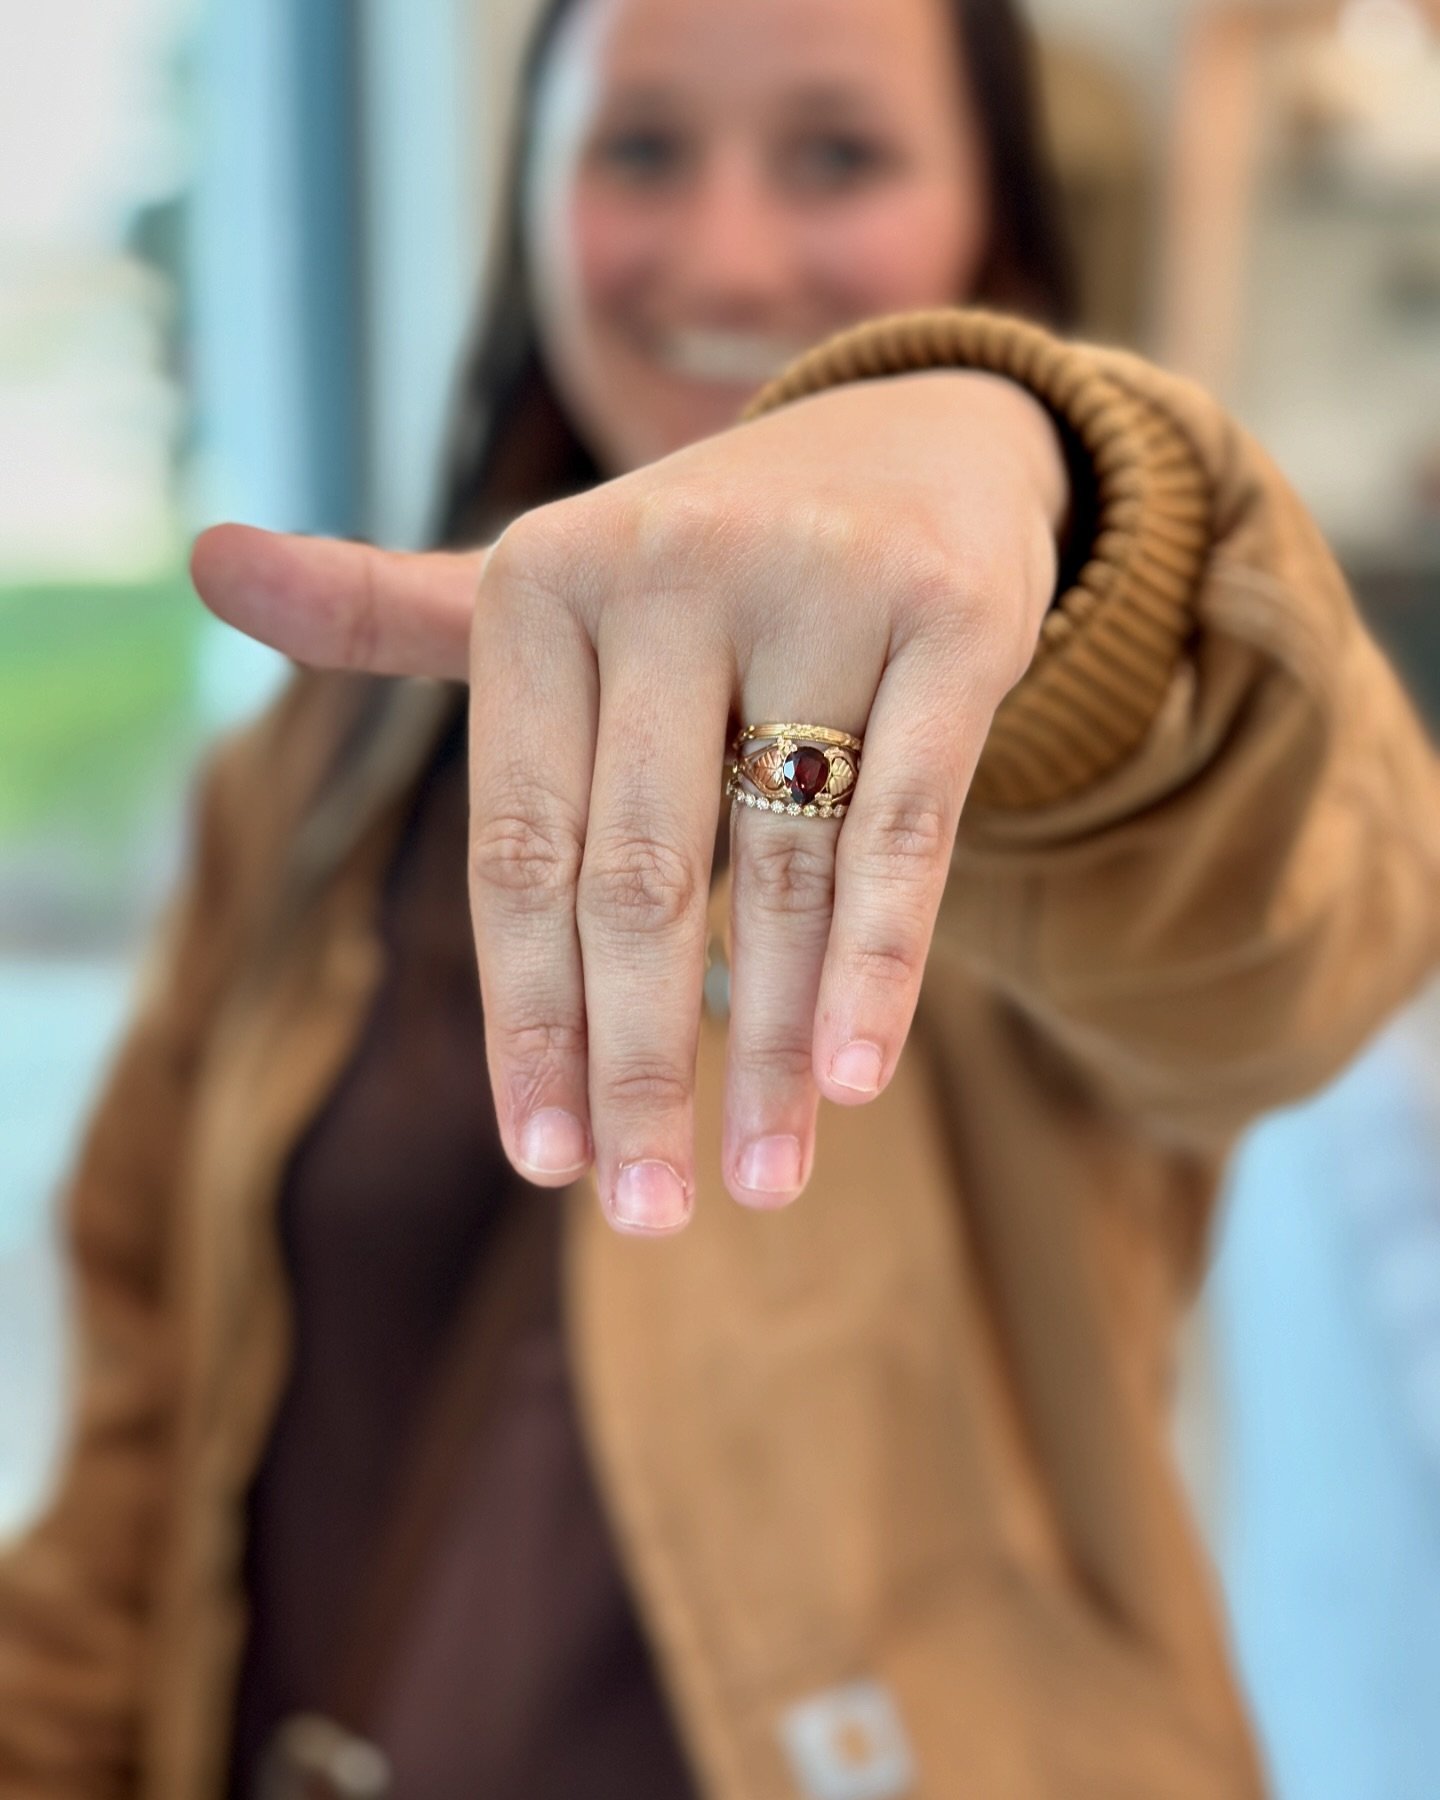 The sweetest ring set for the sweetest gal! 

Last weekend A and her fianc&eacute; came to us to reimagine her grandmother&rsquo;s ring. We ended up choosing a family birthstone to place in this gorgeous setting and two bands to complete the look she